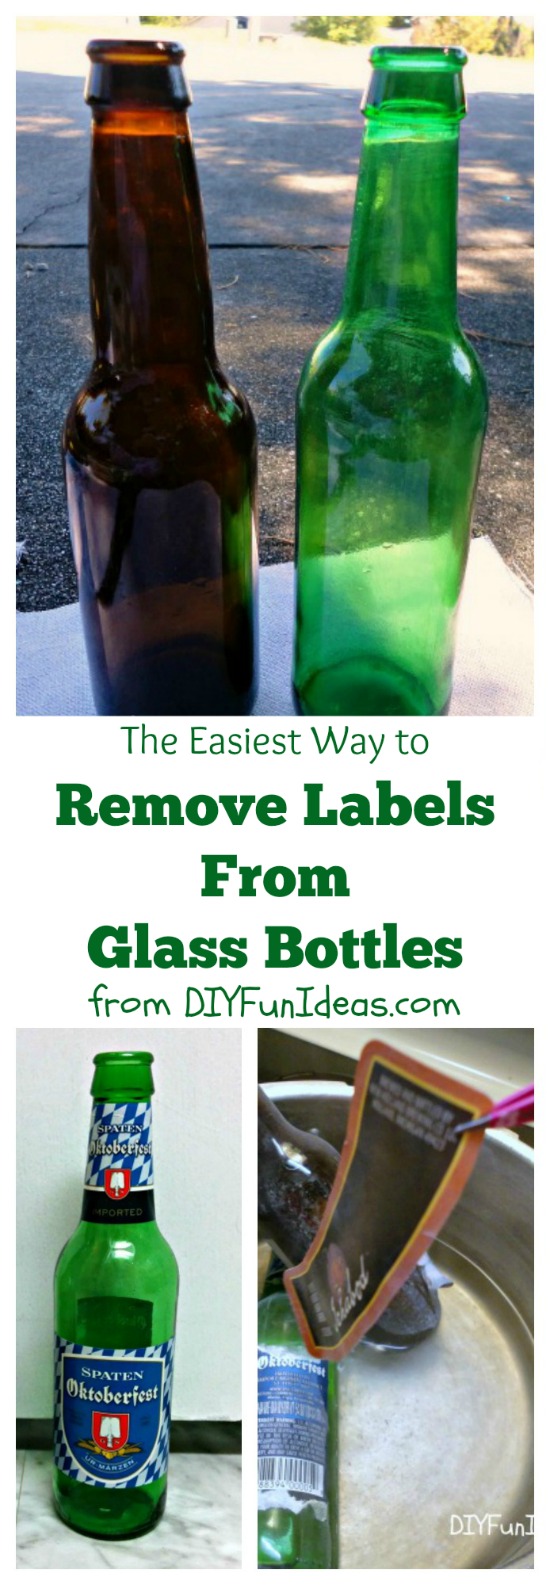 THE EASIEST WAY TO REMOVE LABELS FROM GLASS BOTTLES